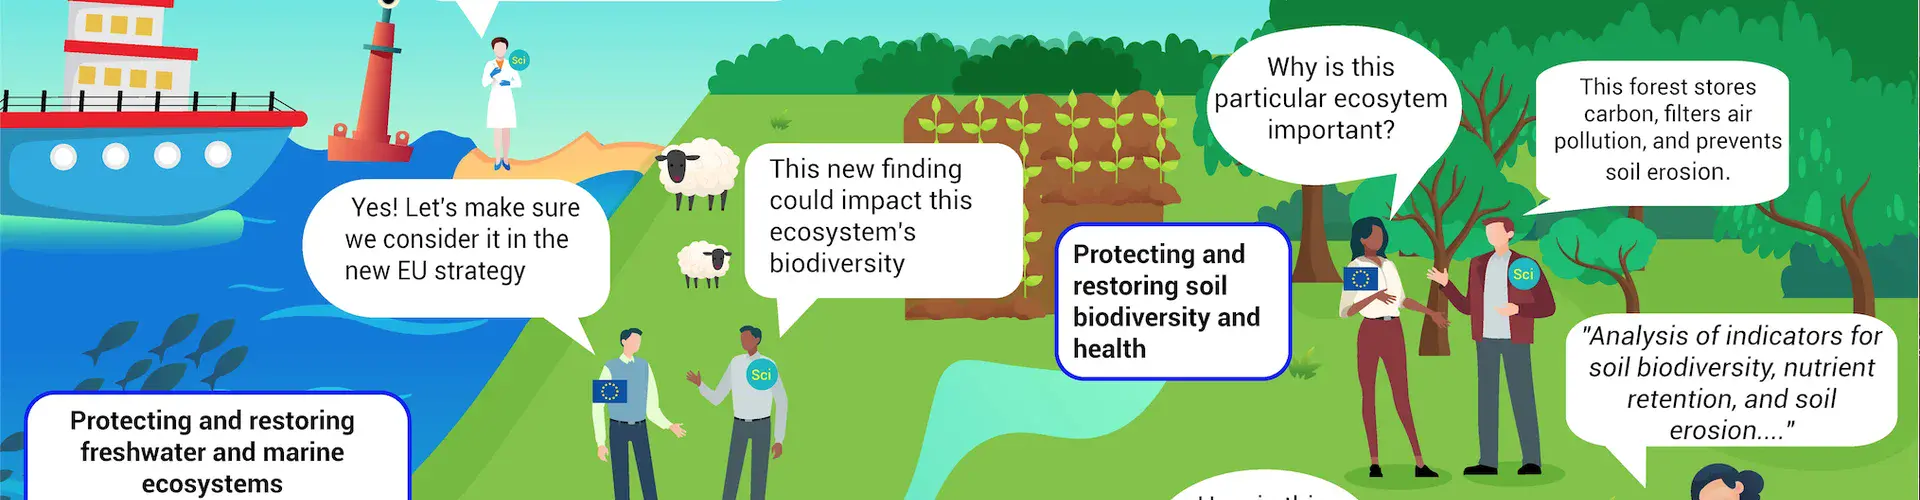 How geoscience can support the EU's biodiversity targets (Credit: alexandra8796@gmail.com)